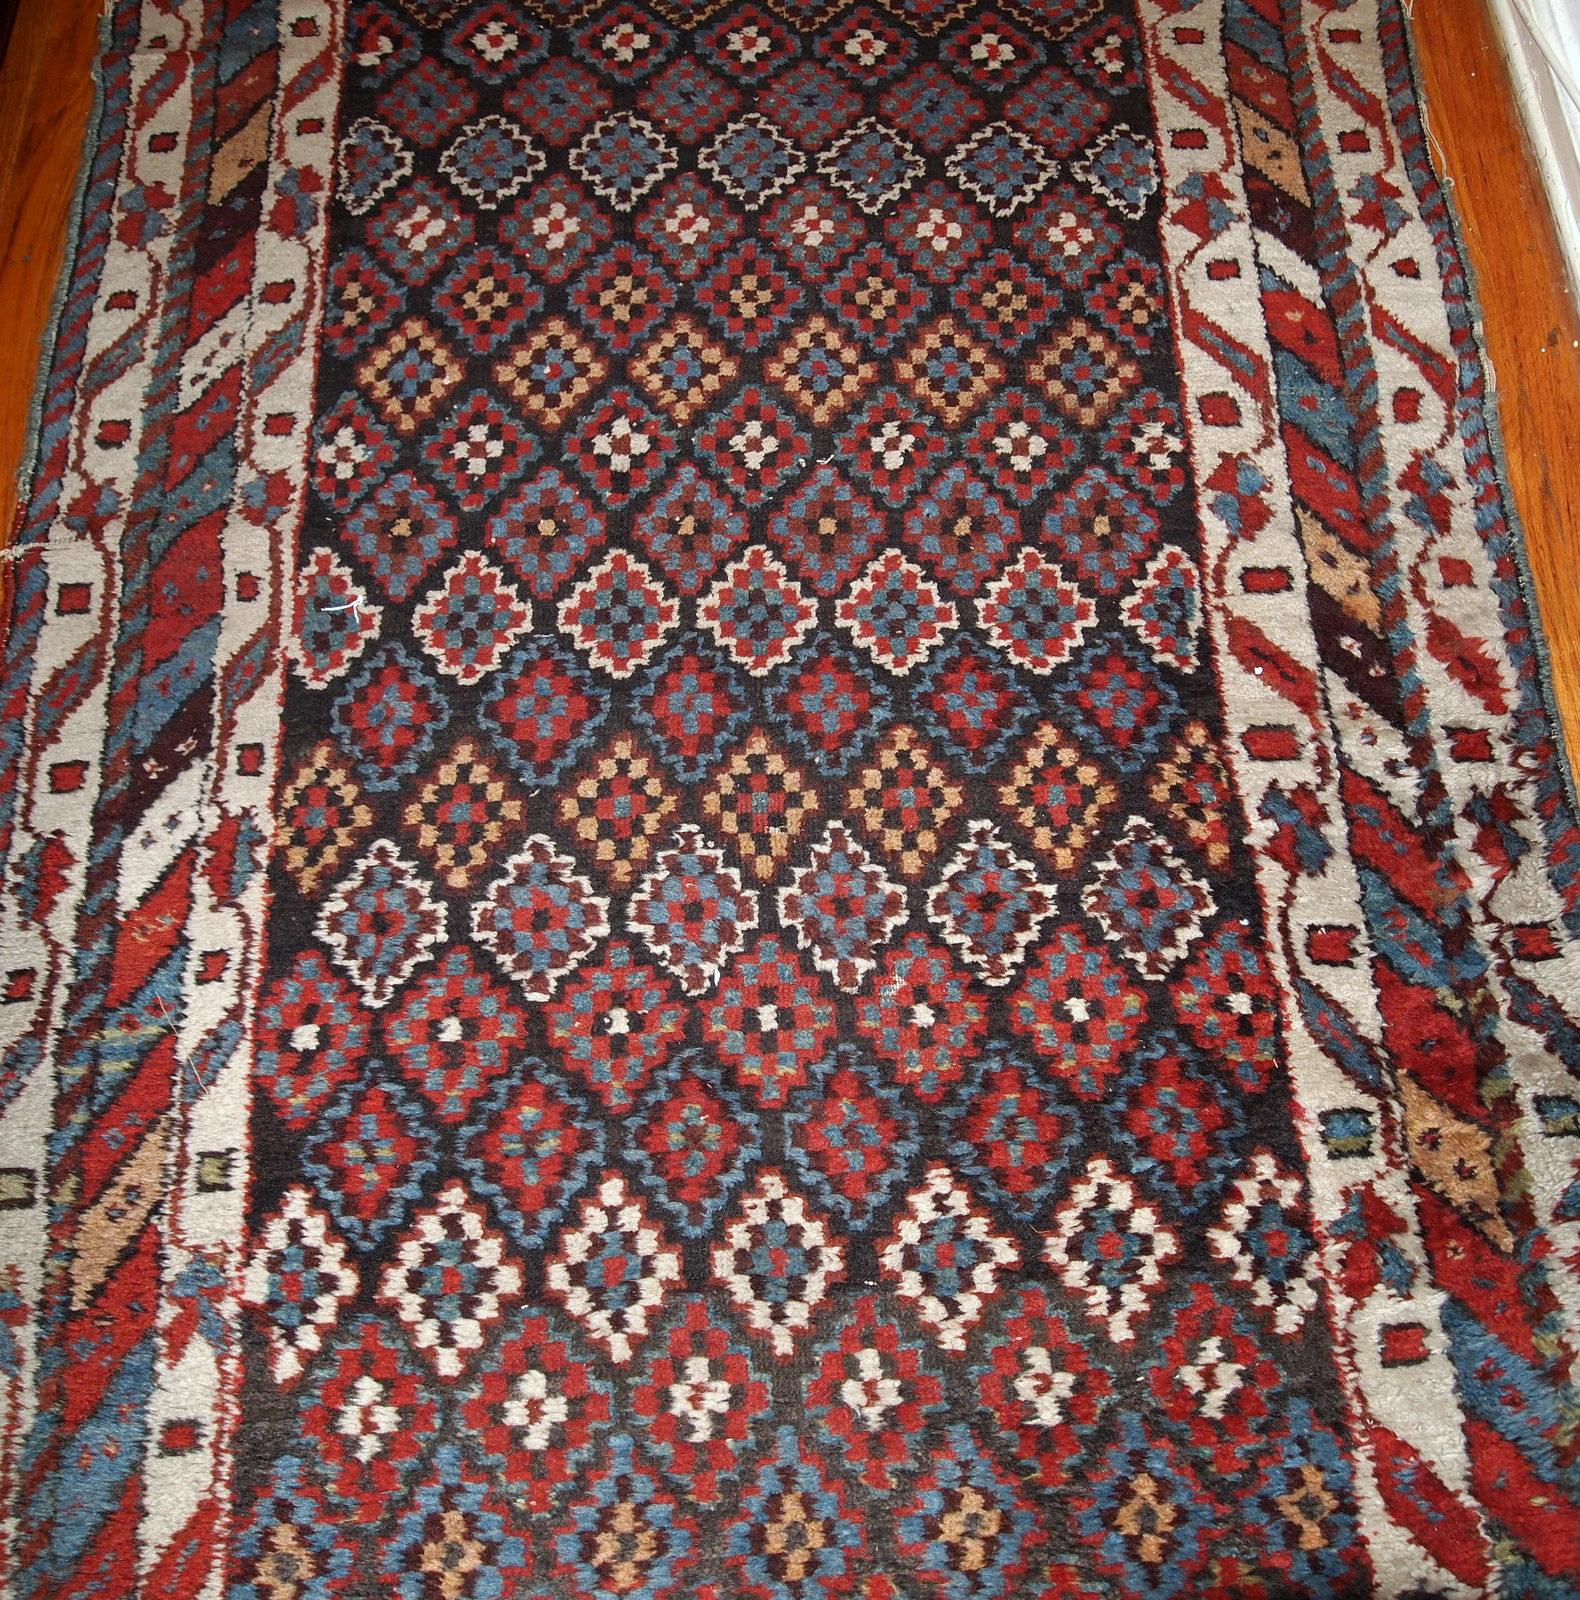 Antique handmade Northwest rug in original good condition from 1880s. The rug made in repeating geometric pattern in colourful shades.

- Condition: original good,

- circa: 1880s,

- Size: 4.2' x 9.1' ( 128cm x 277cm ),

- Material: